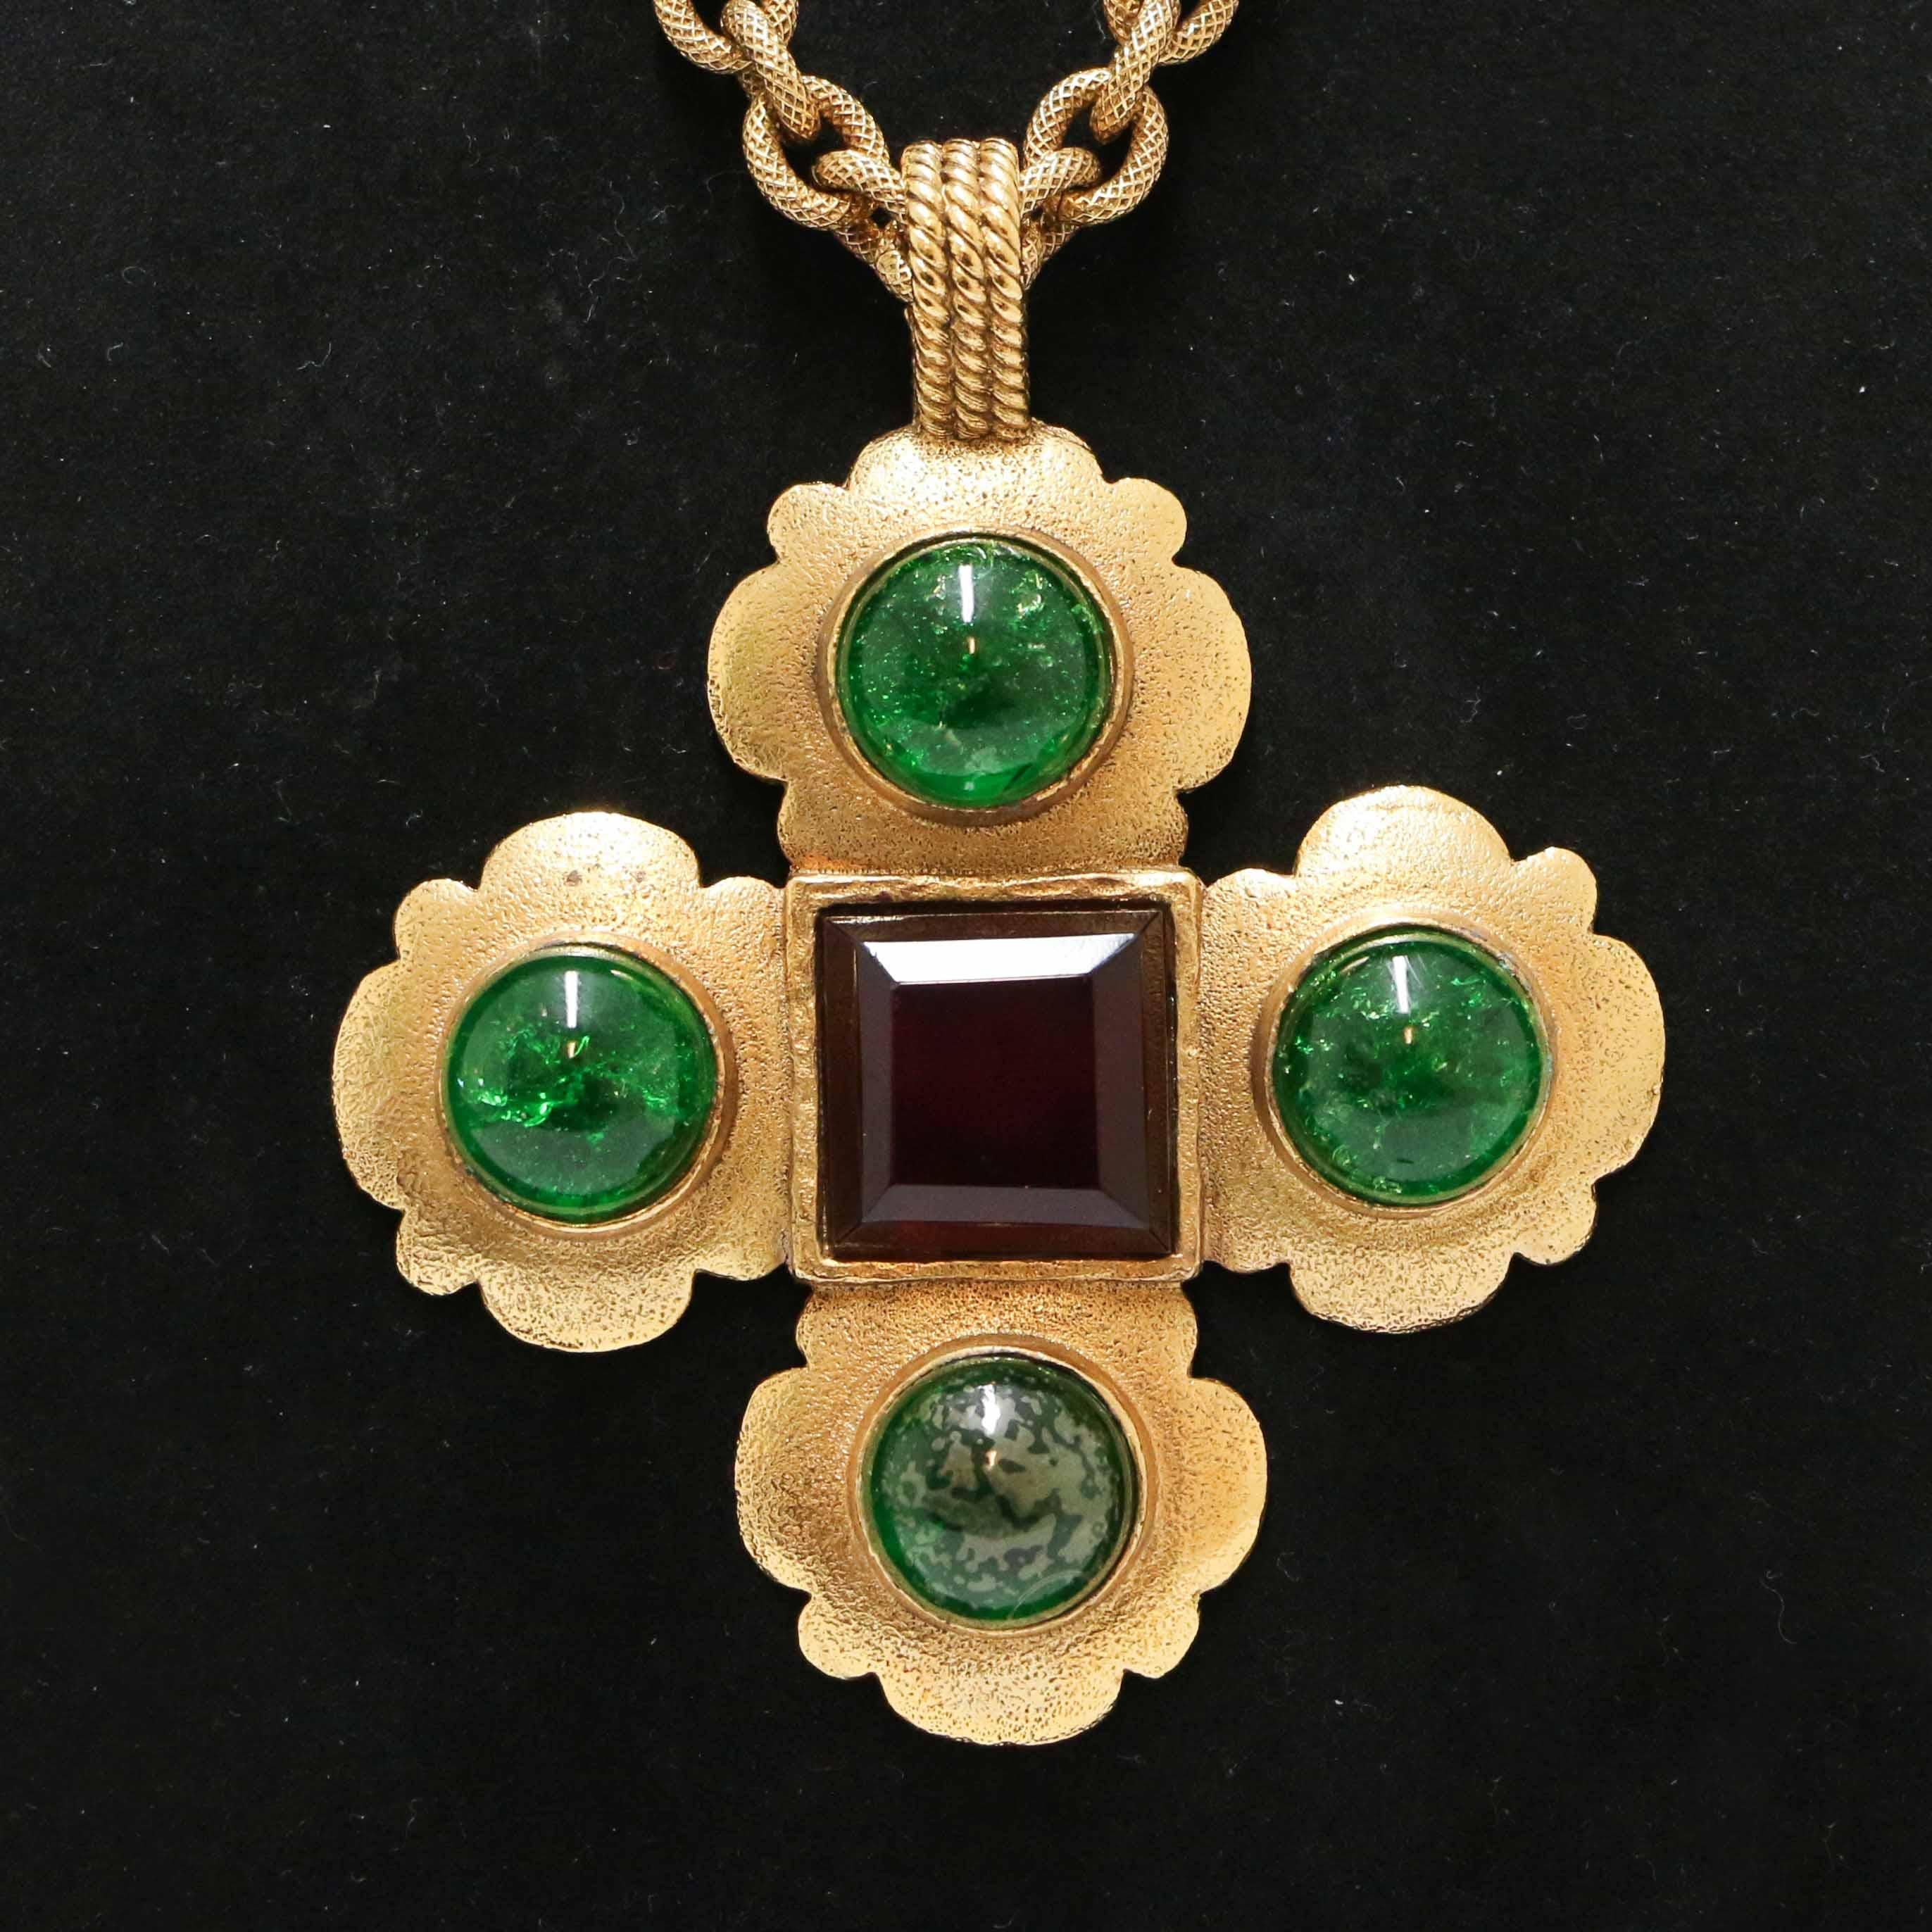 Amazing Chanel couture necklace in glass paste
Condition: good
Made in France
Material: green glass paste, gold-plated metal, red crystal
Color: gold, green, red
Dimensions: pendant 9 x 9 cm, chain length 78 cm
Hardware: gold-plated metal 
Stamp :